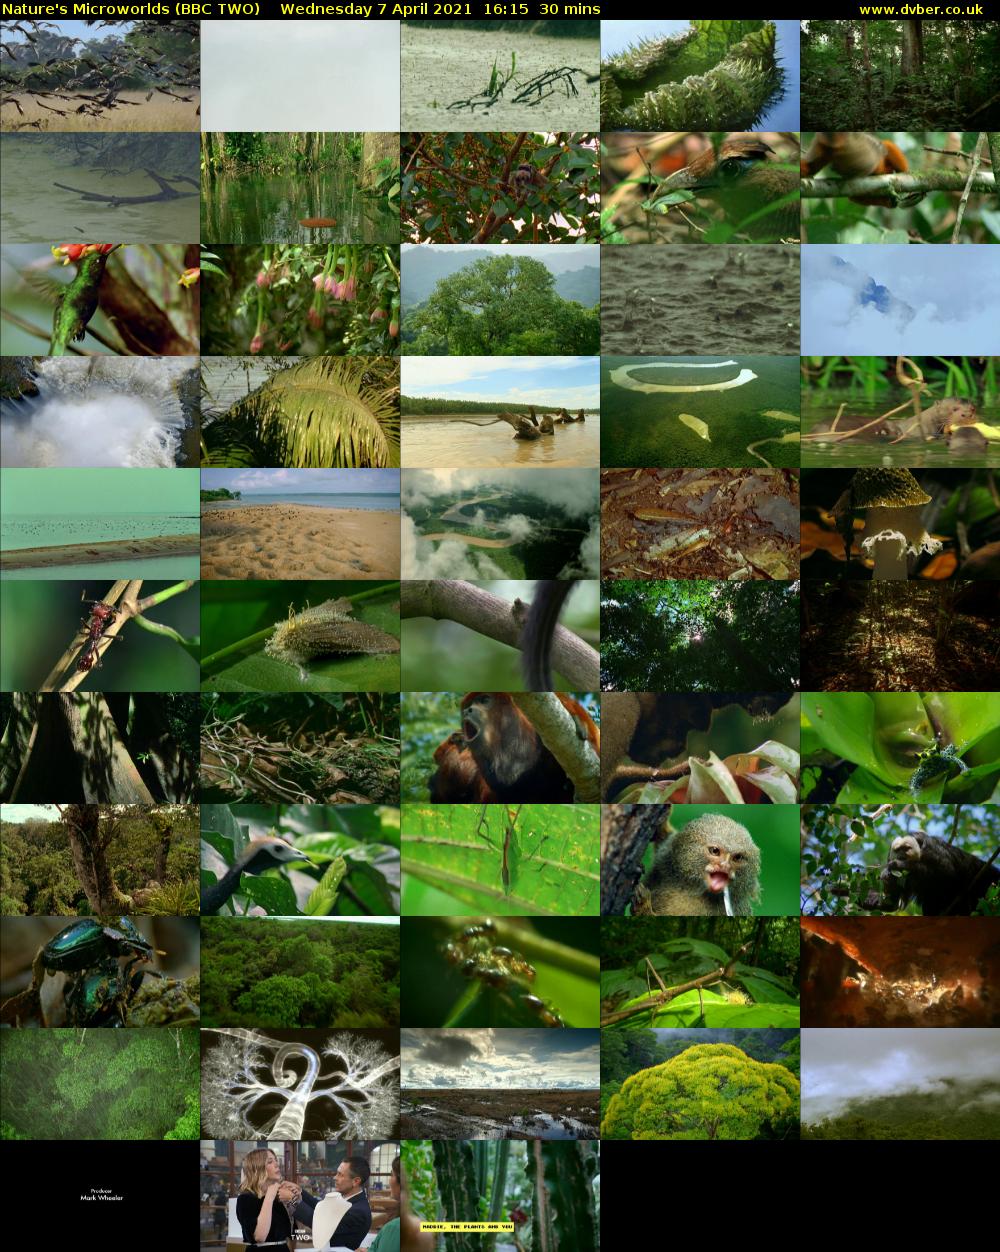 Nature's Microworlds (BBC TWO) Wednesday 7 April 2021 16:15 - 16:45